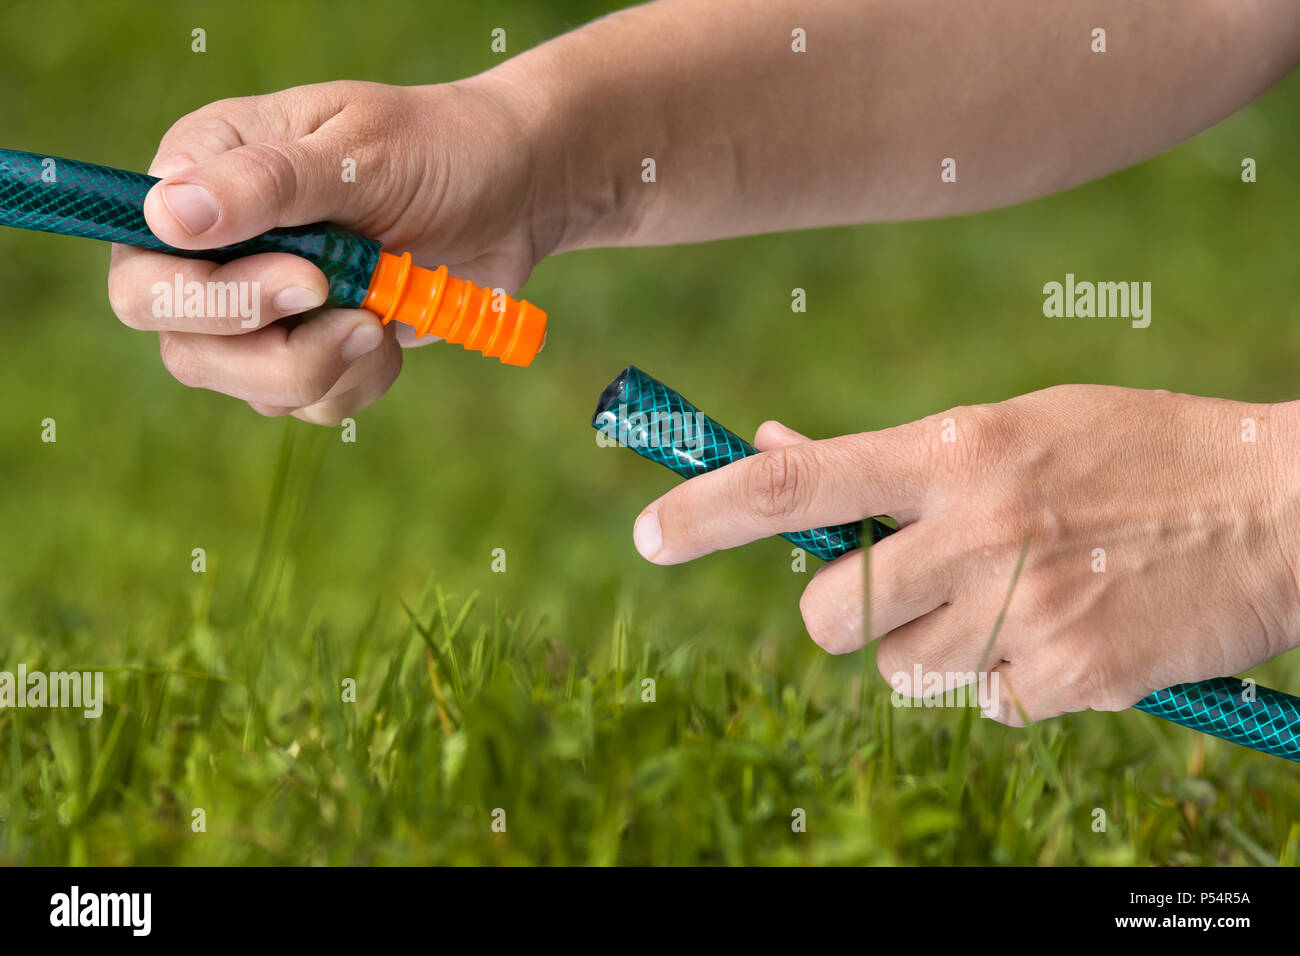 hands connecting hoses for irrigation of lawn or garden, closeup Stock Photo